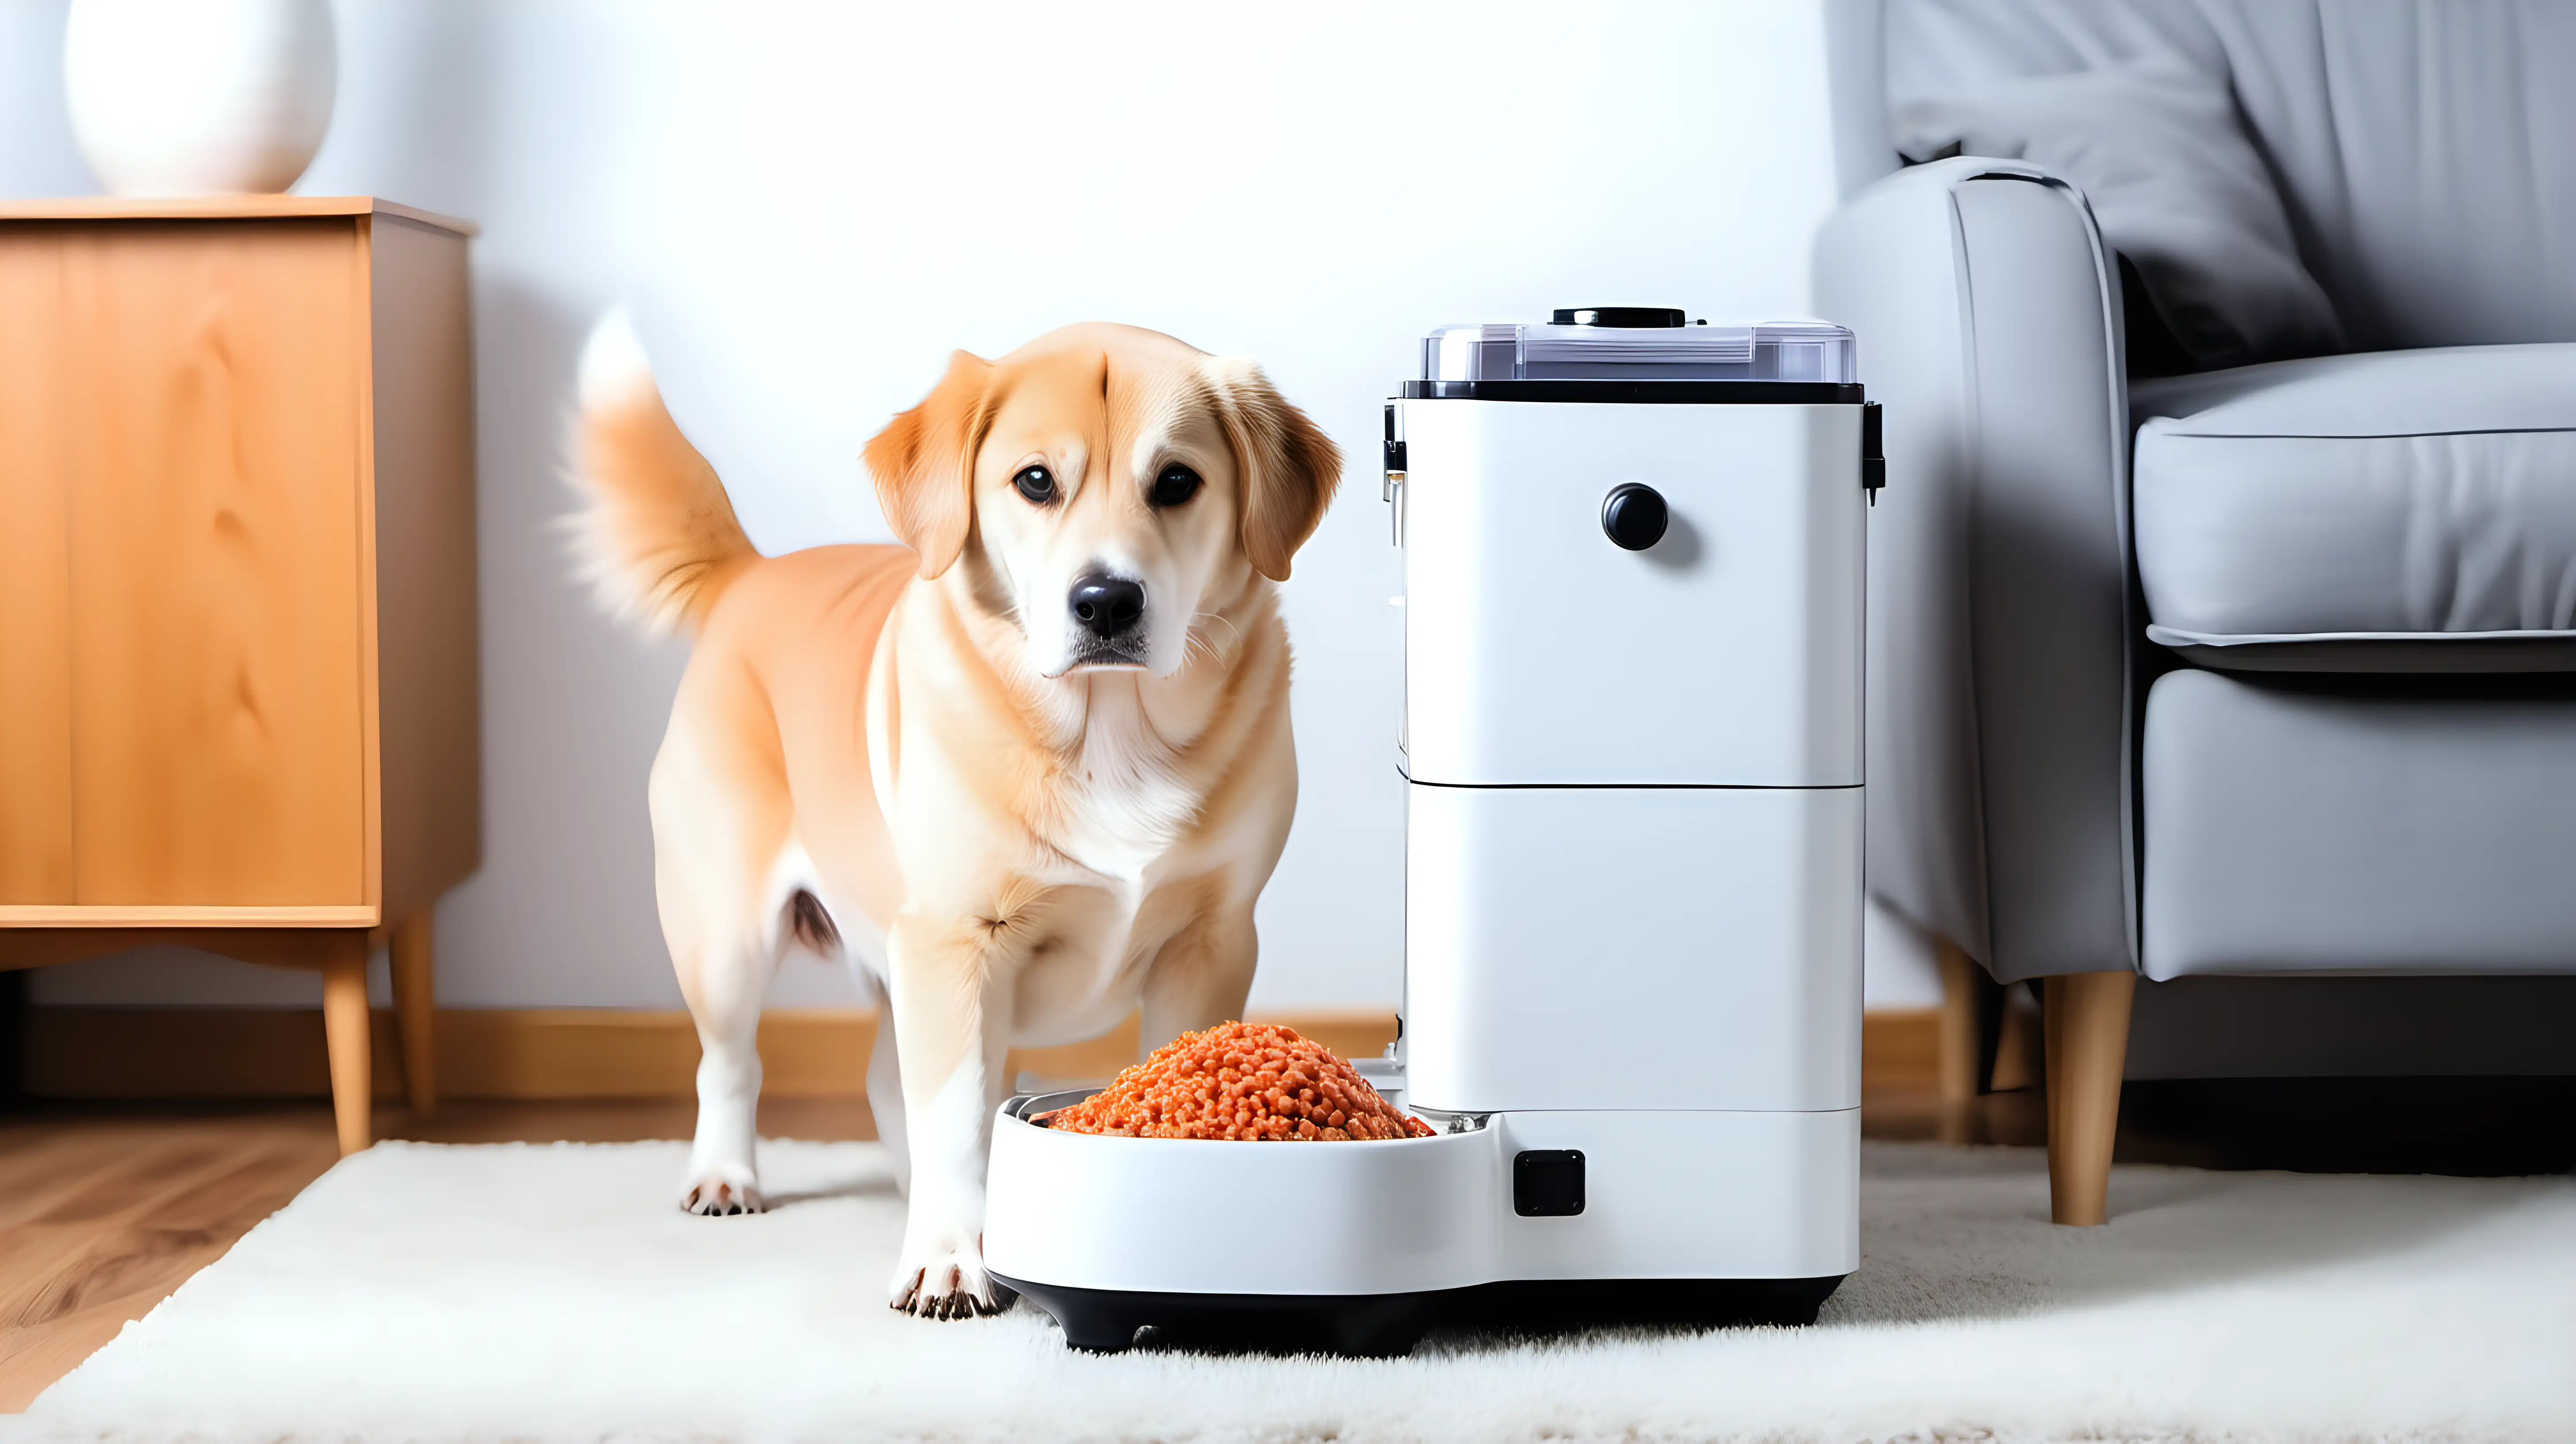 Minimal Automatic Food Dispenser with Dog in Bright Living Room